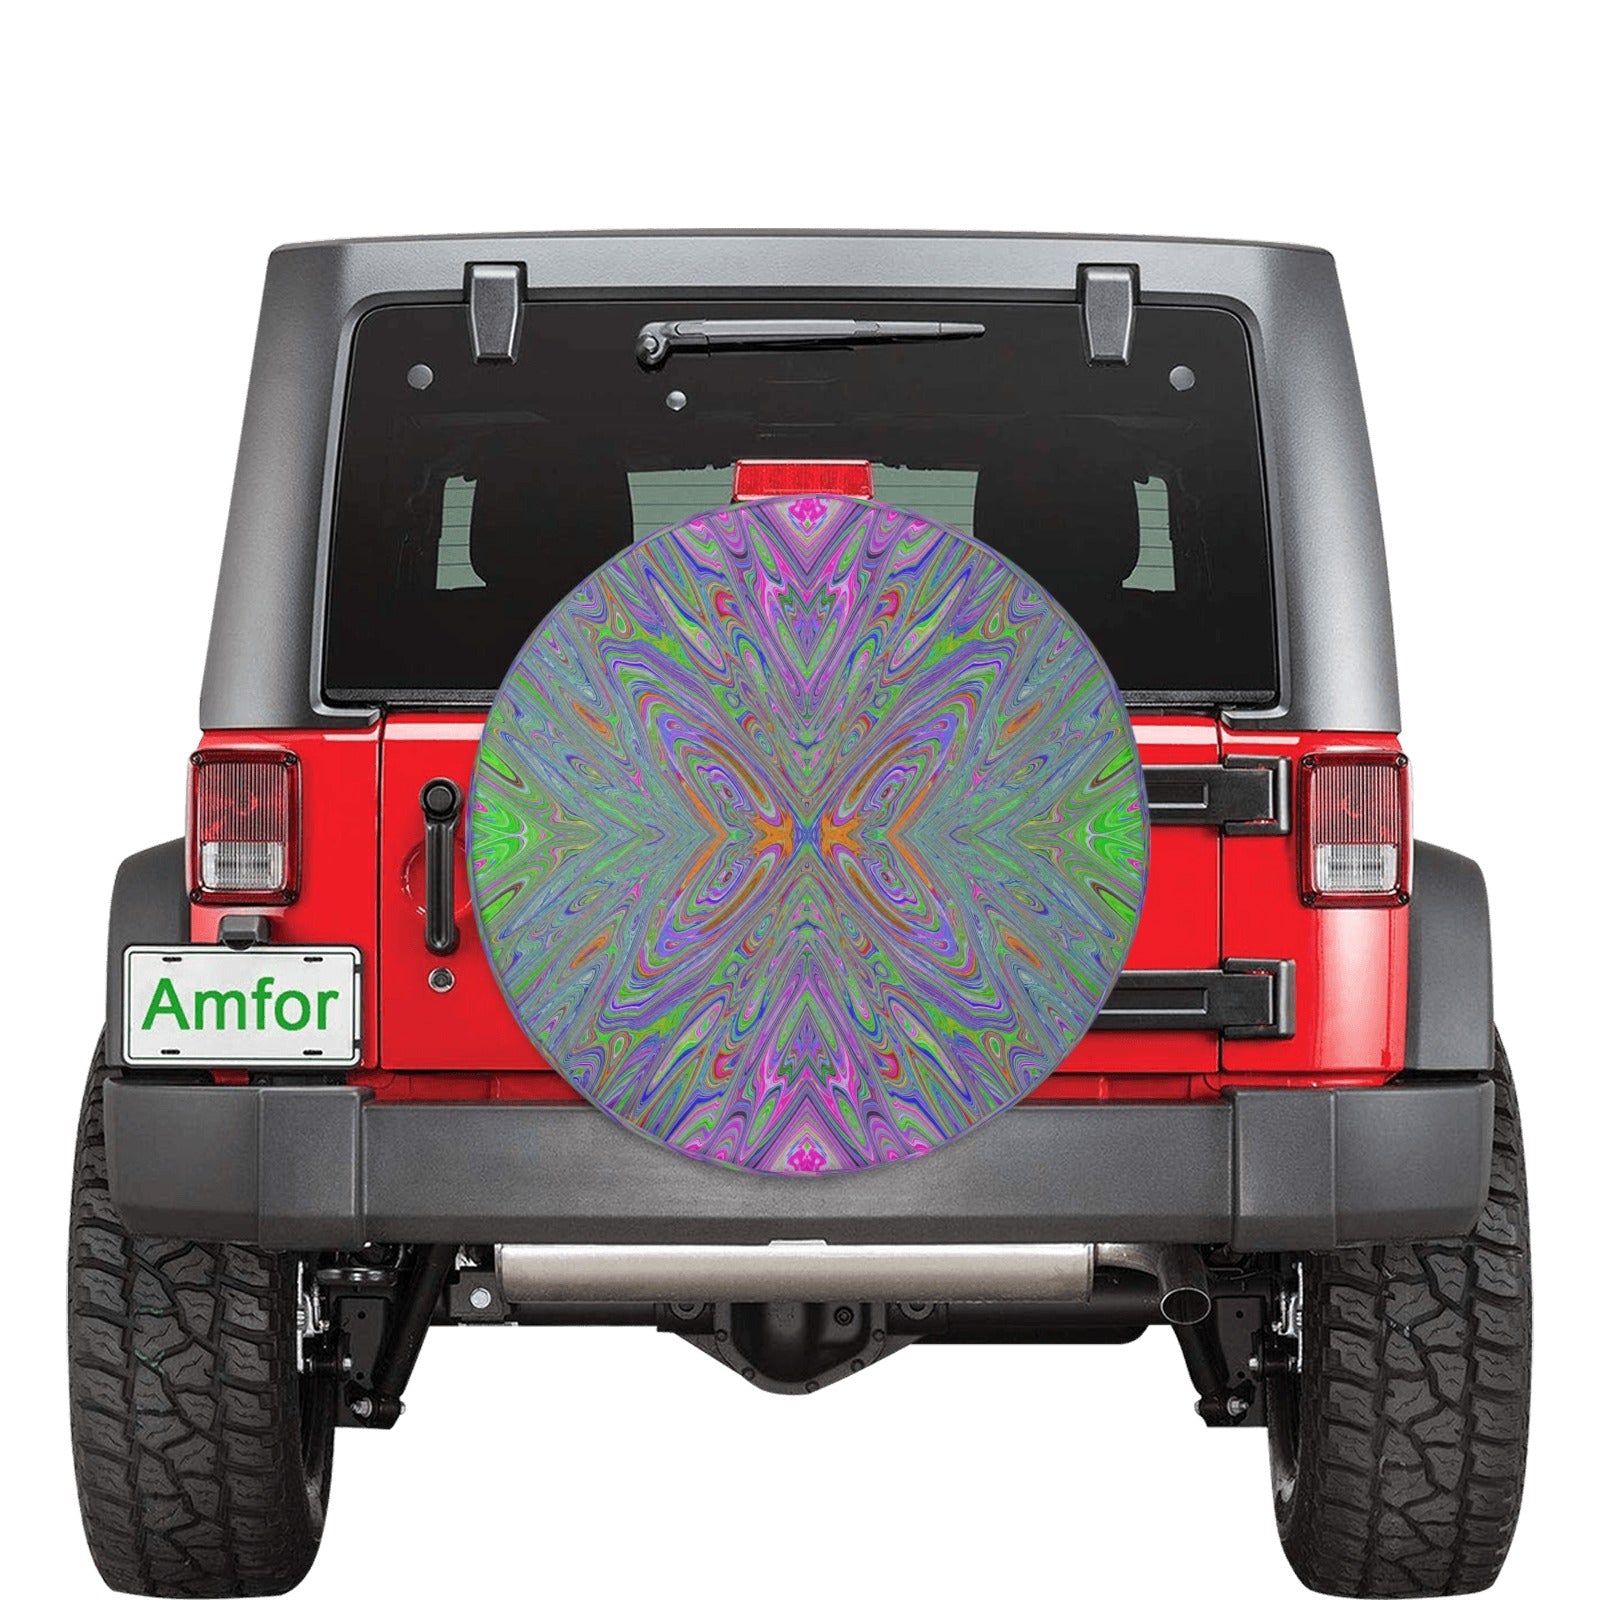 Spare Tire Covers, Abstract Trippy Purple, Orange and Lime Green Butterfly - Medium